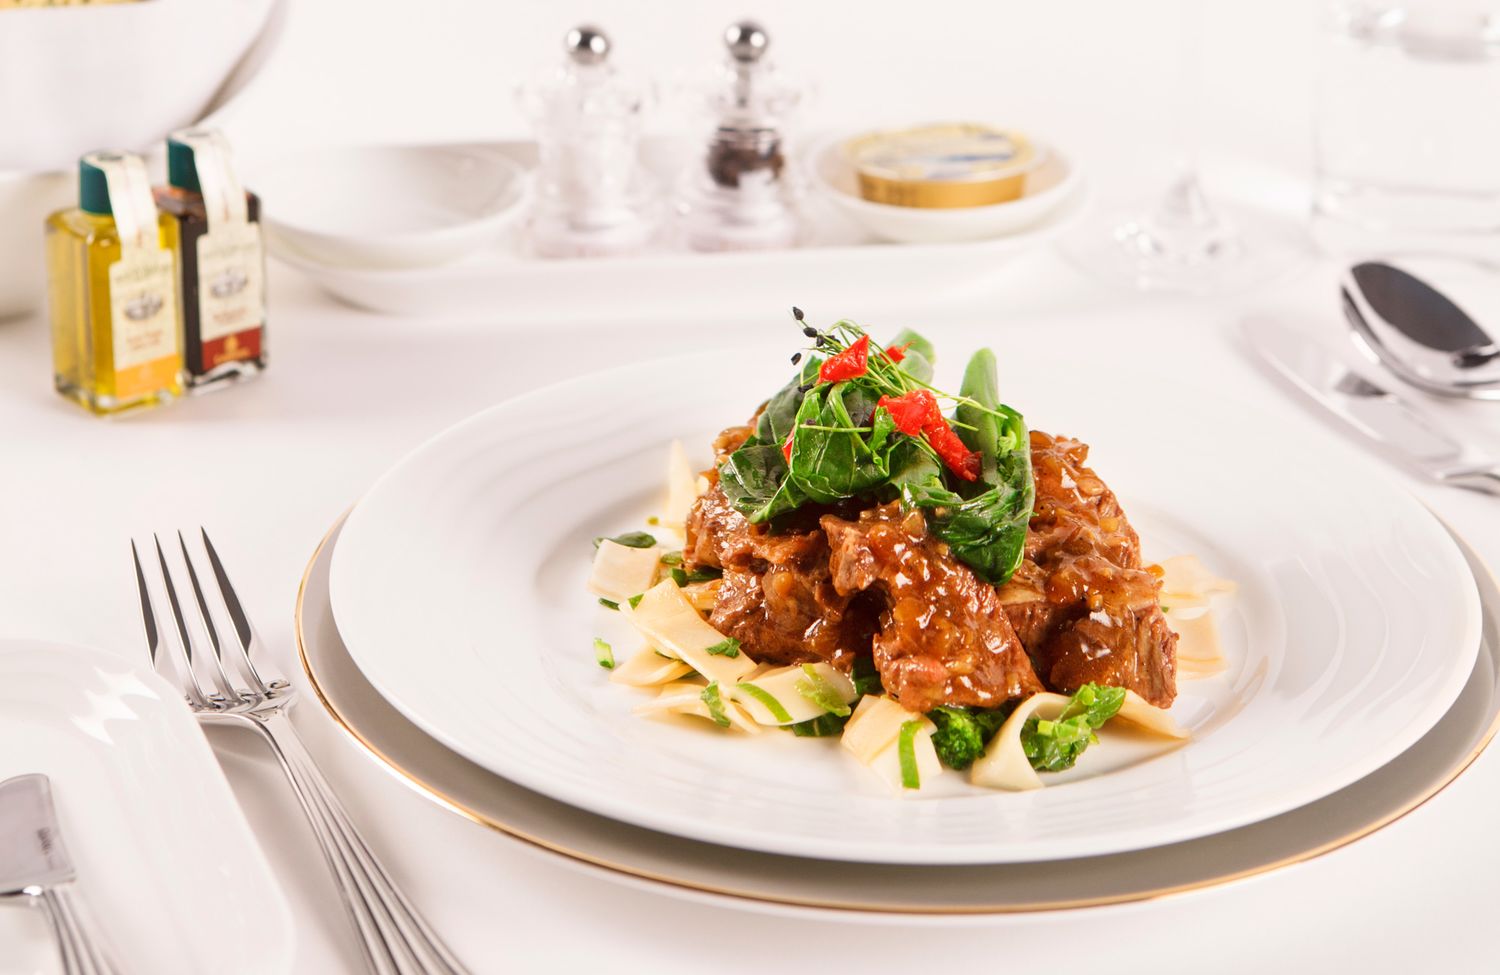 This first class main course of 'stockyard Asian braised beef cheek' sees the beef slow-braised in Asian master stock, served with stir-fried rice noodles and kai-lan.